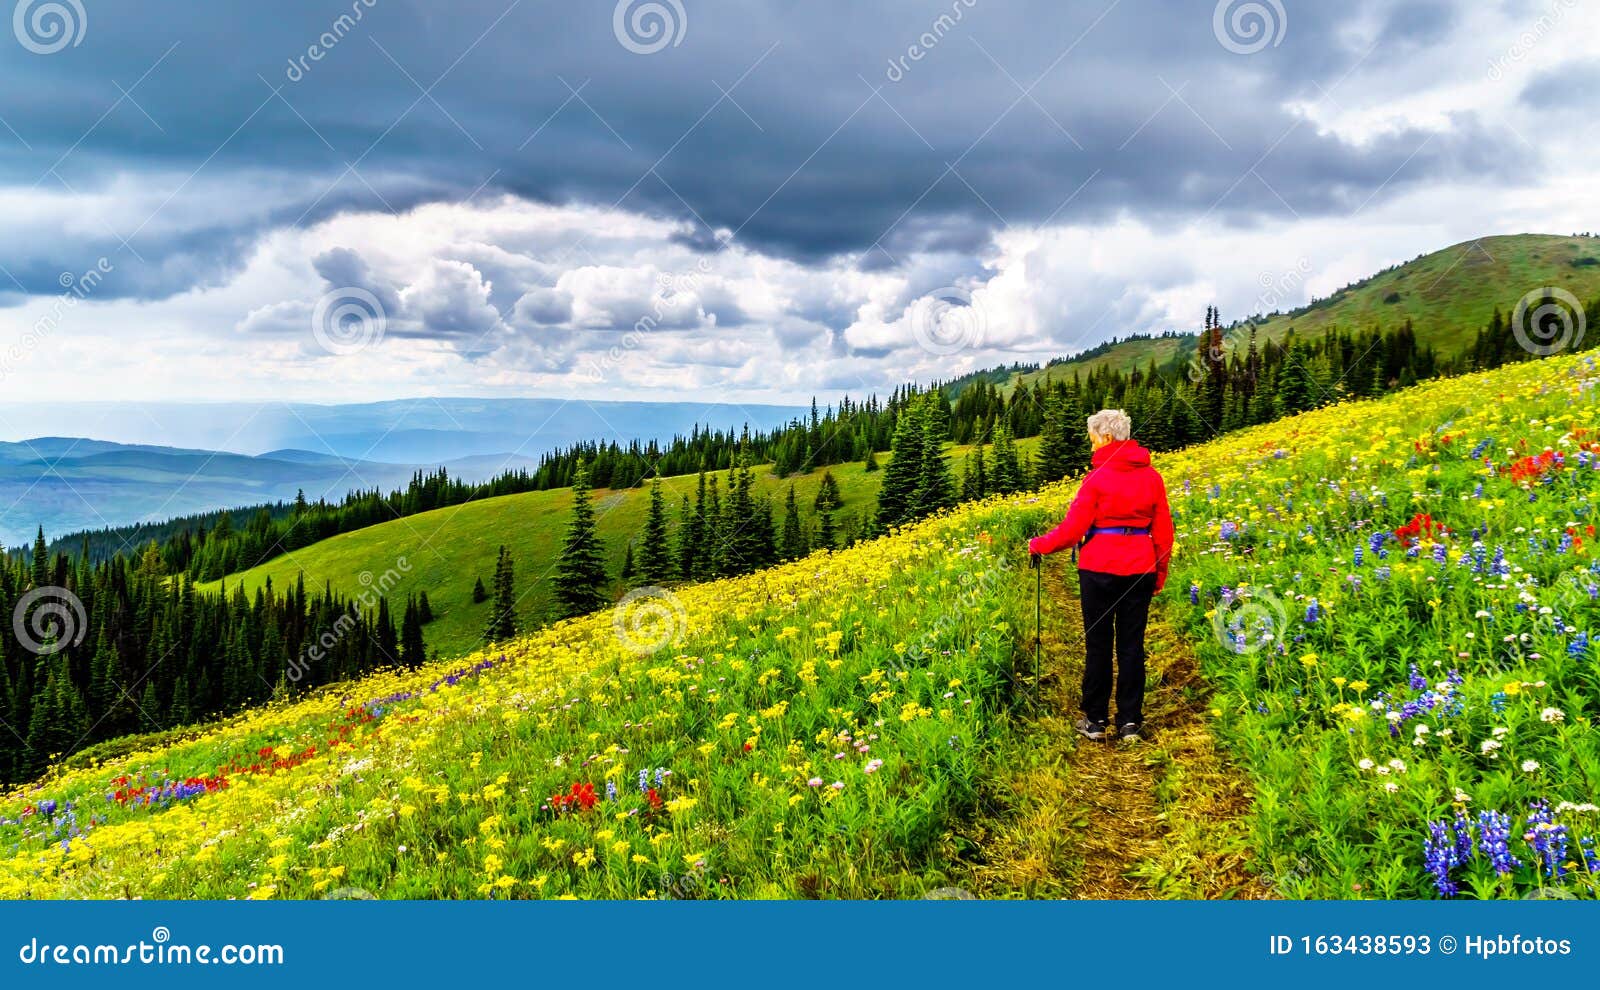 Alpine Meadows Filled With An Abundance Of Wildflowers In 